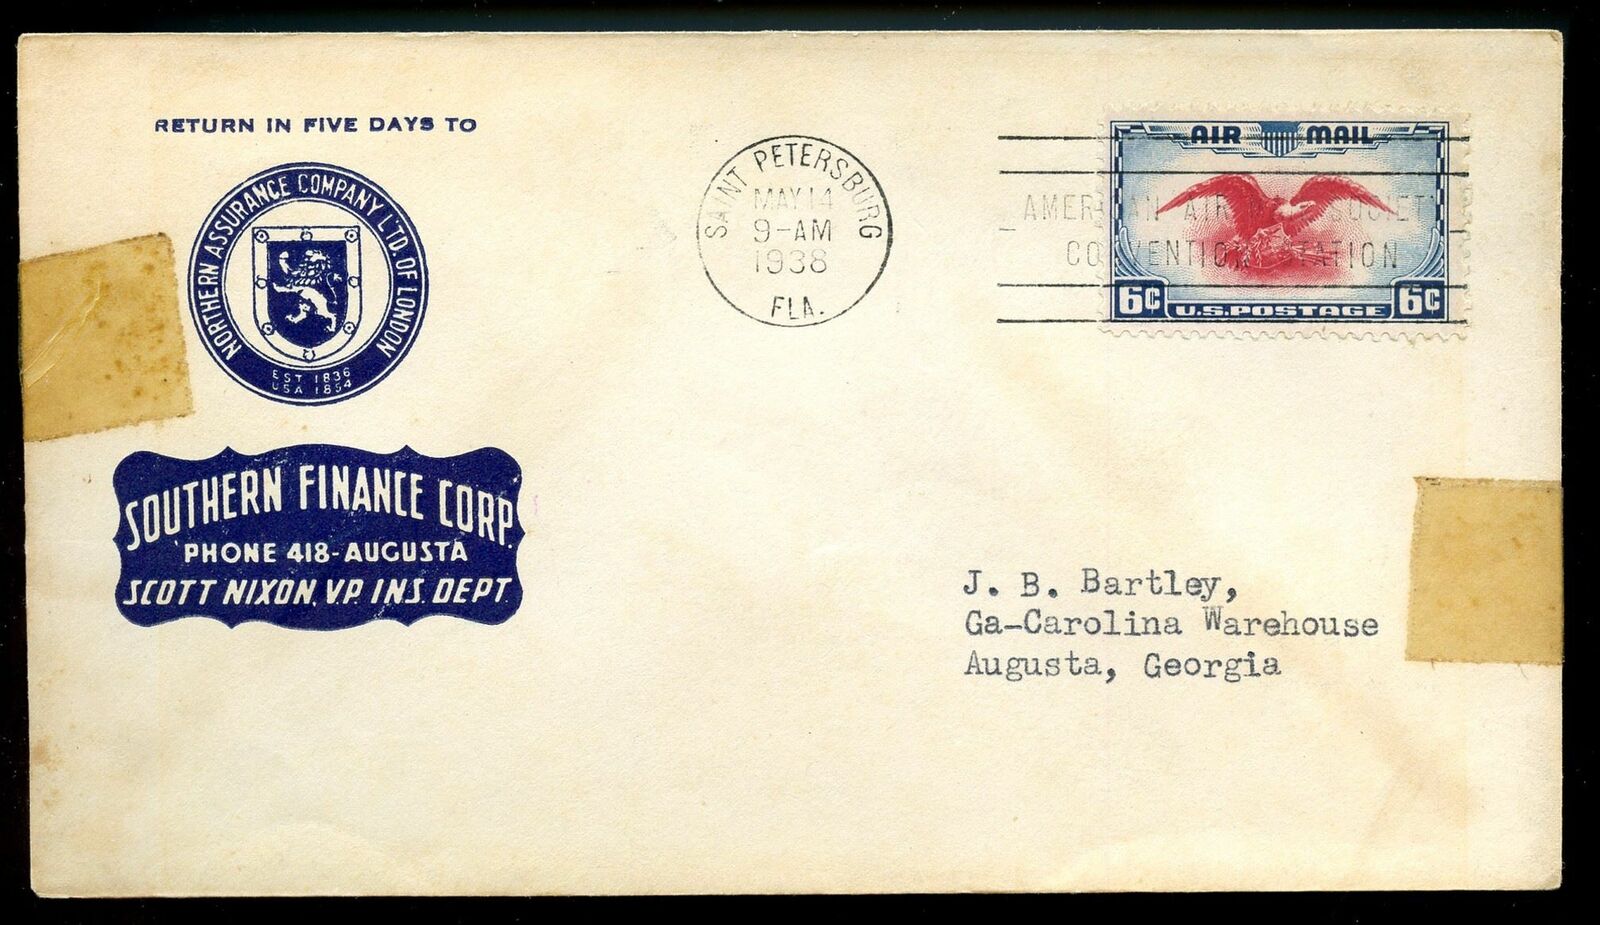 U.S. Scott C23 on 1938 Ad Cover for Southern Finance Corp.